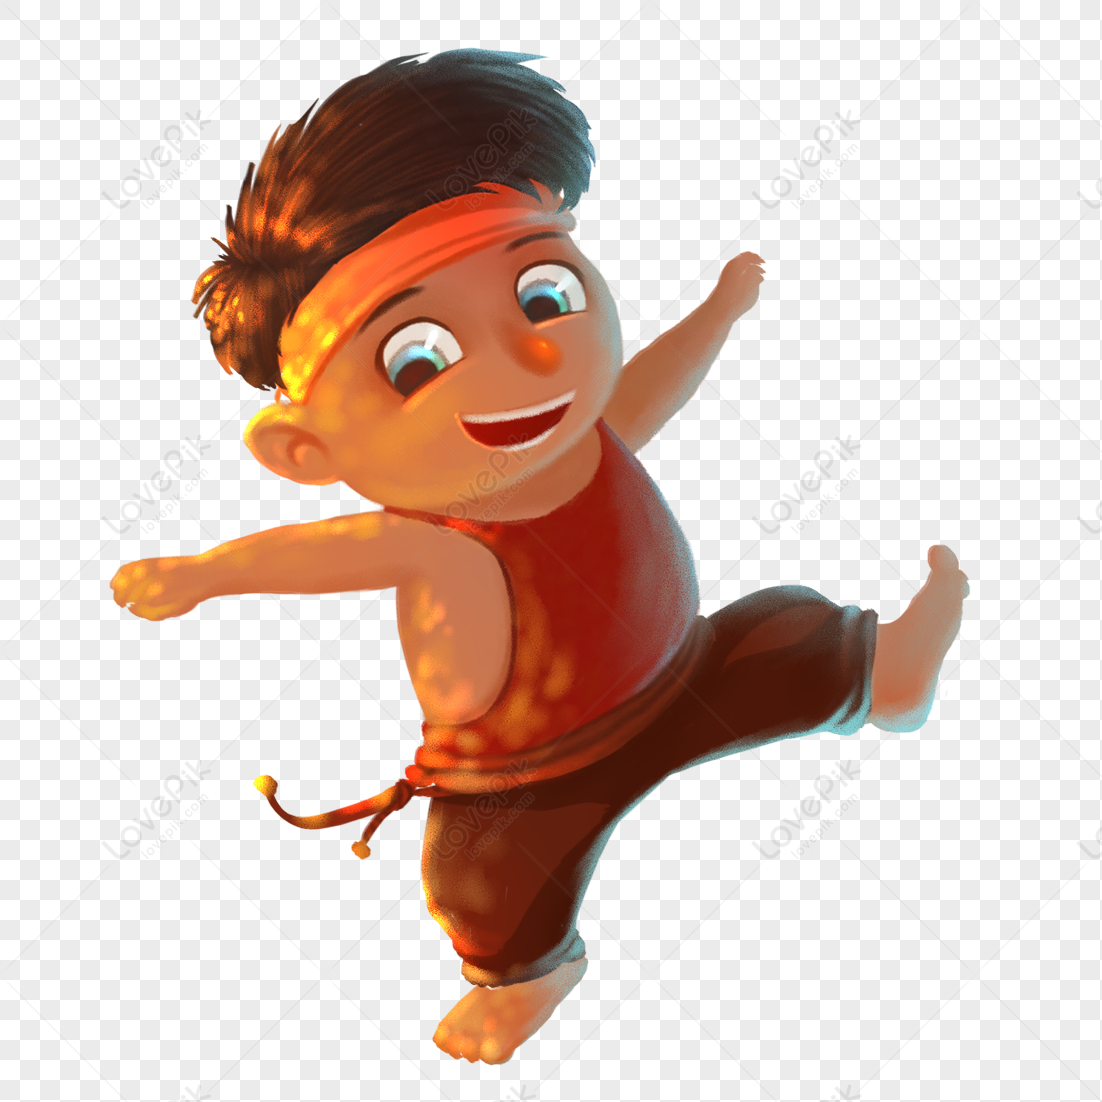 Cartoon Boy PNG White Transparent And Clipart Image For Free Download -  Lovepik | 400490182